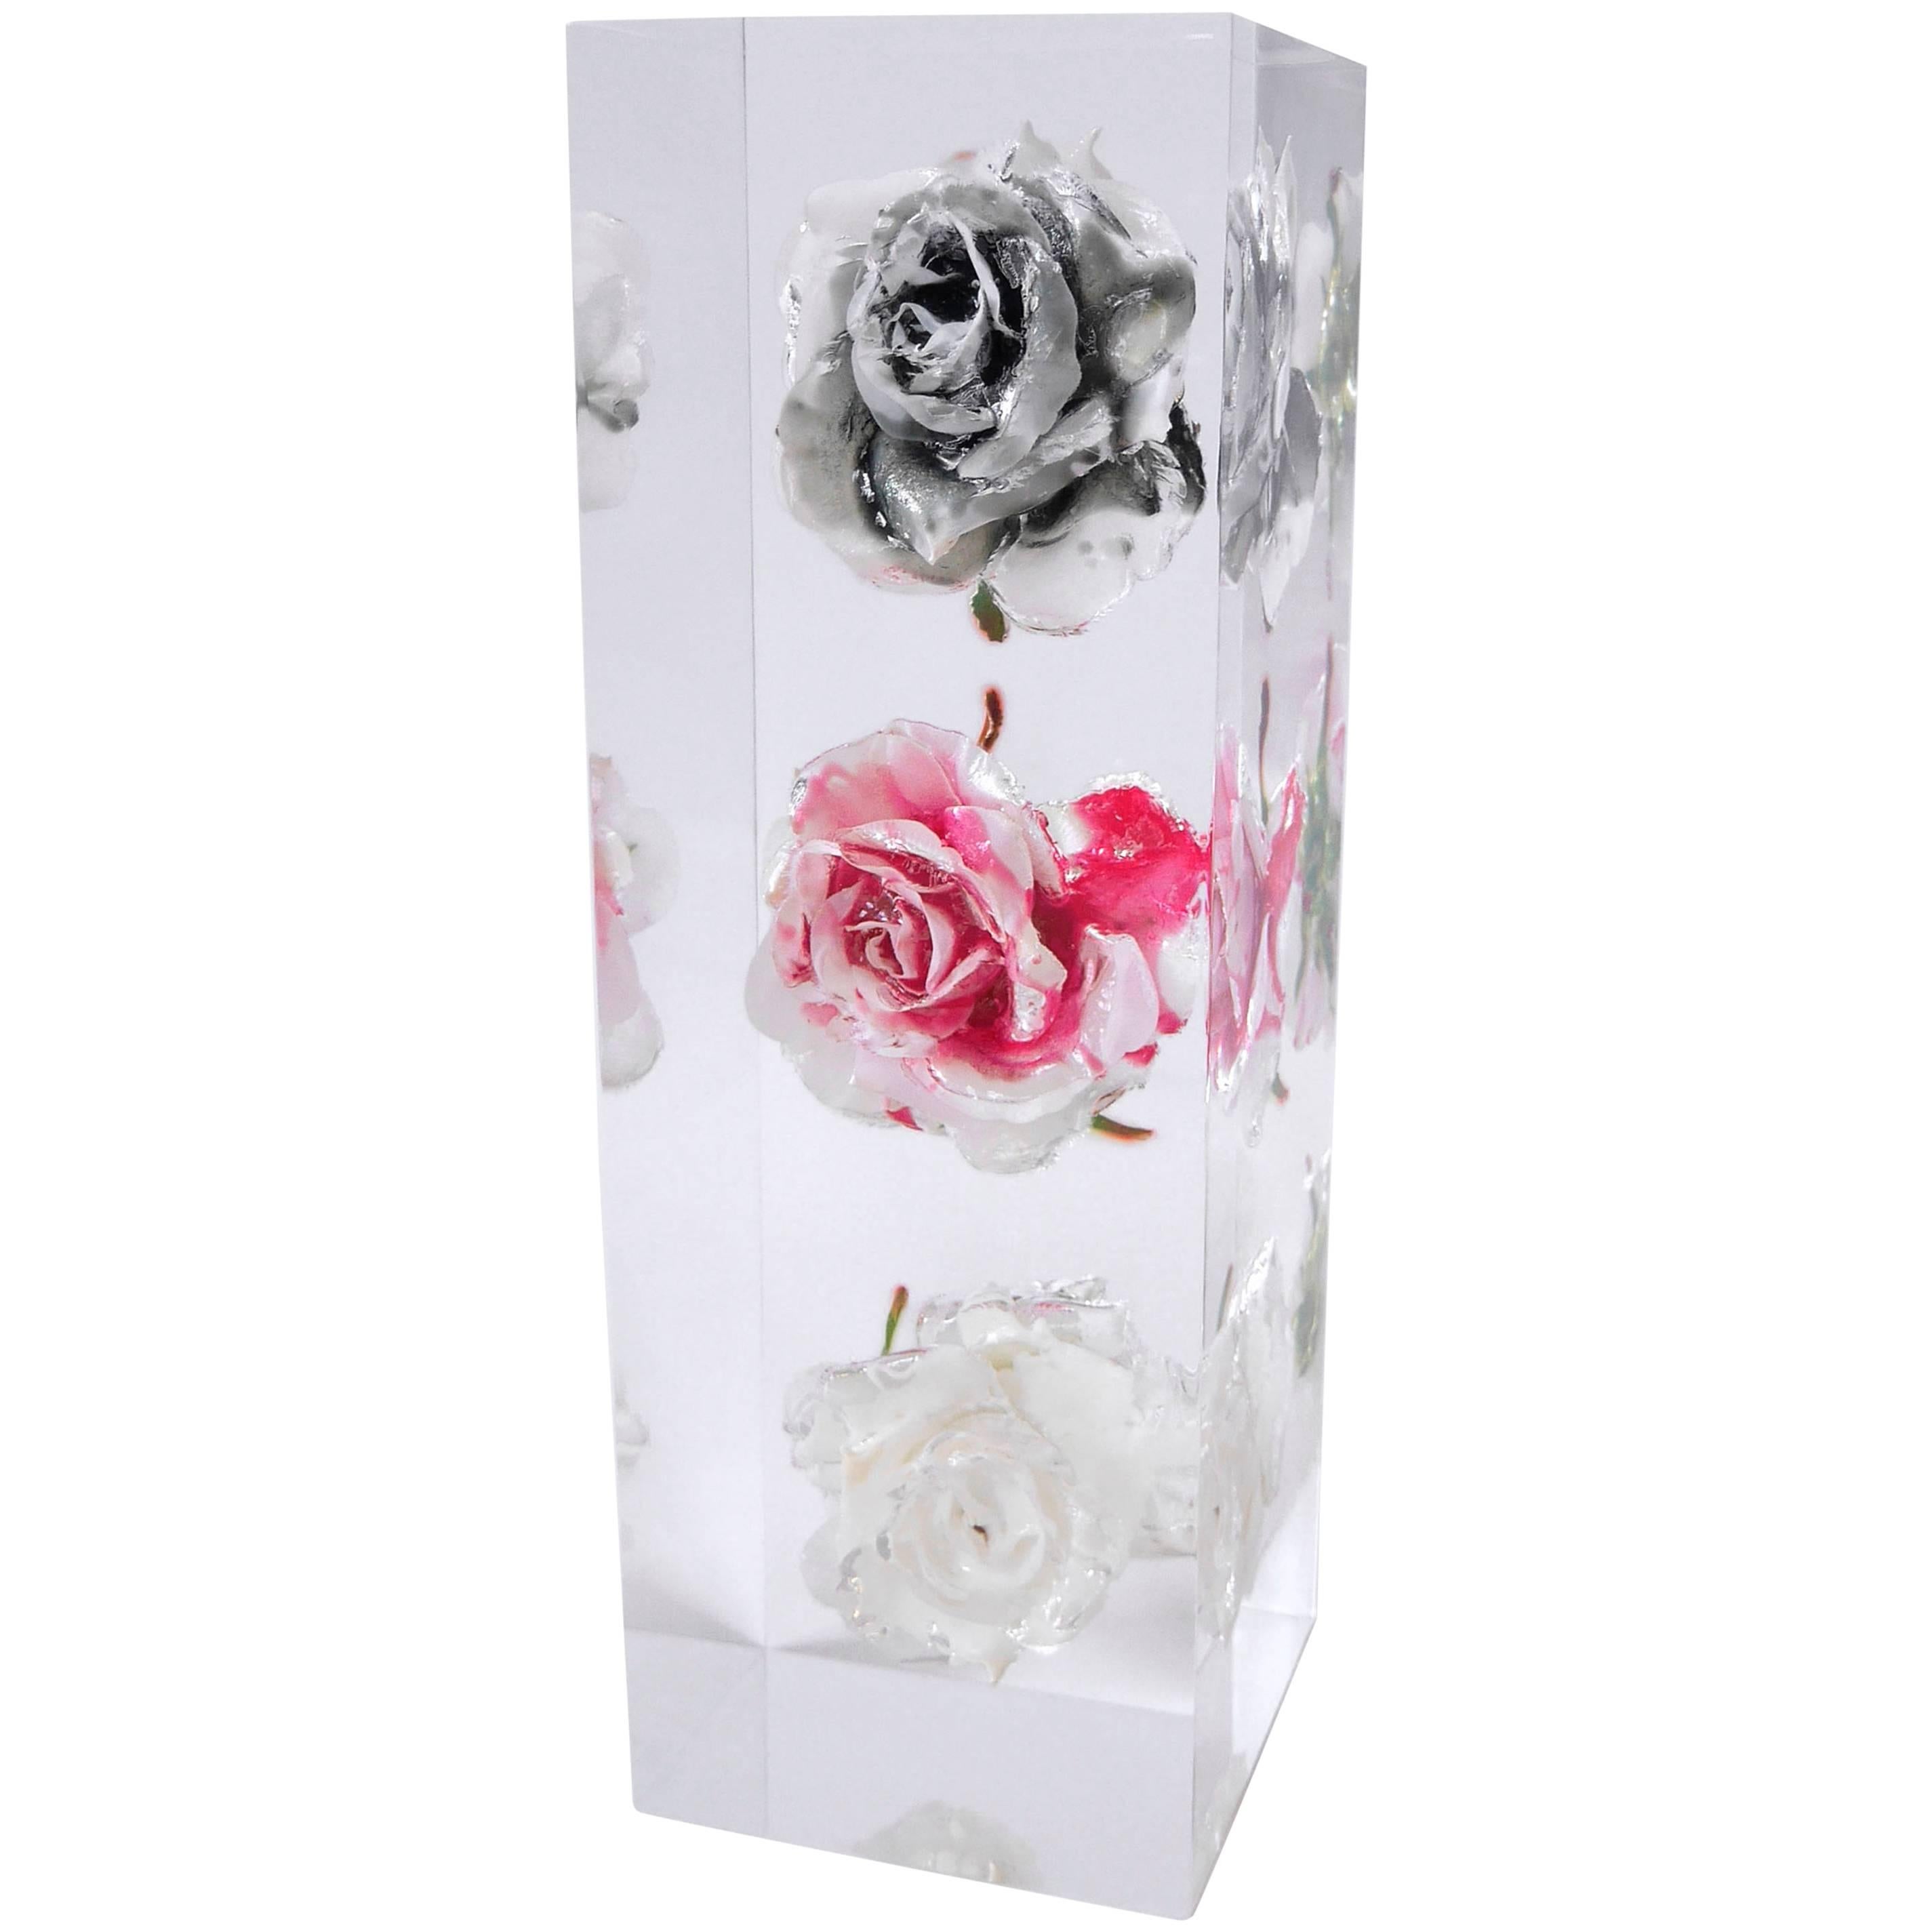 "Rose Stack BLD" Resin Sculpture by Ray Geary, 2015